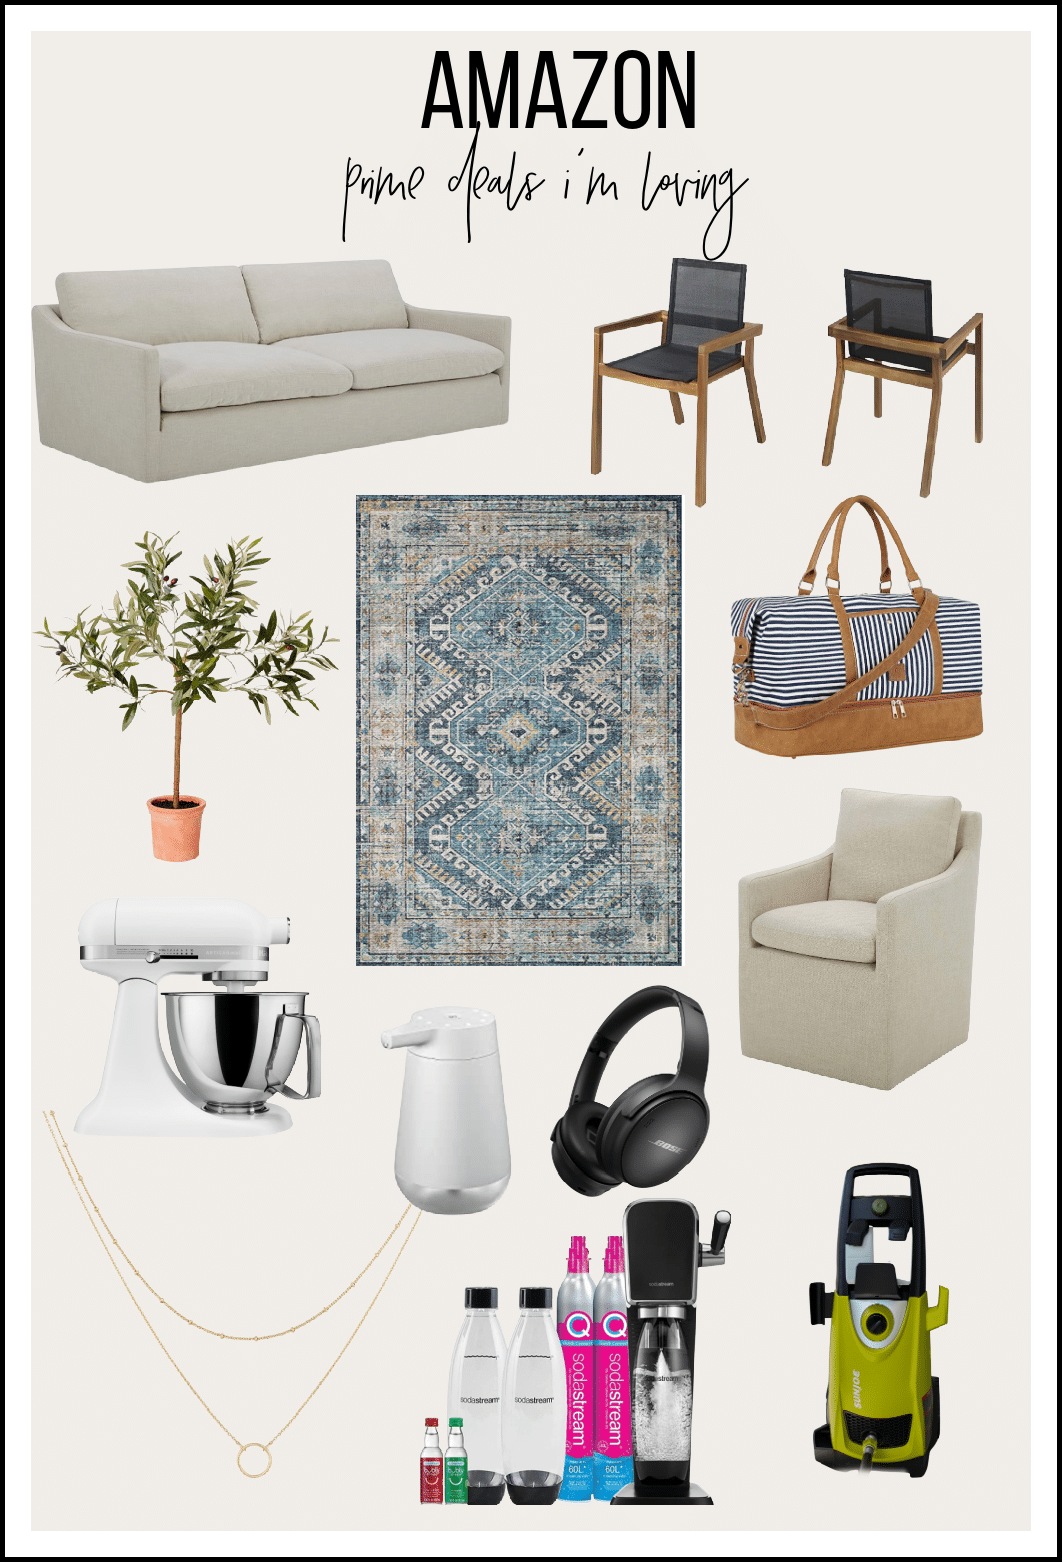 Amazon Prime Day Deals I'm Loving From Furnishings to Kitchen Essentials